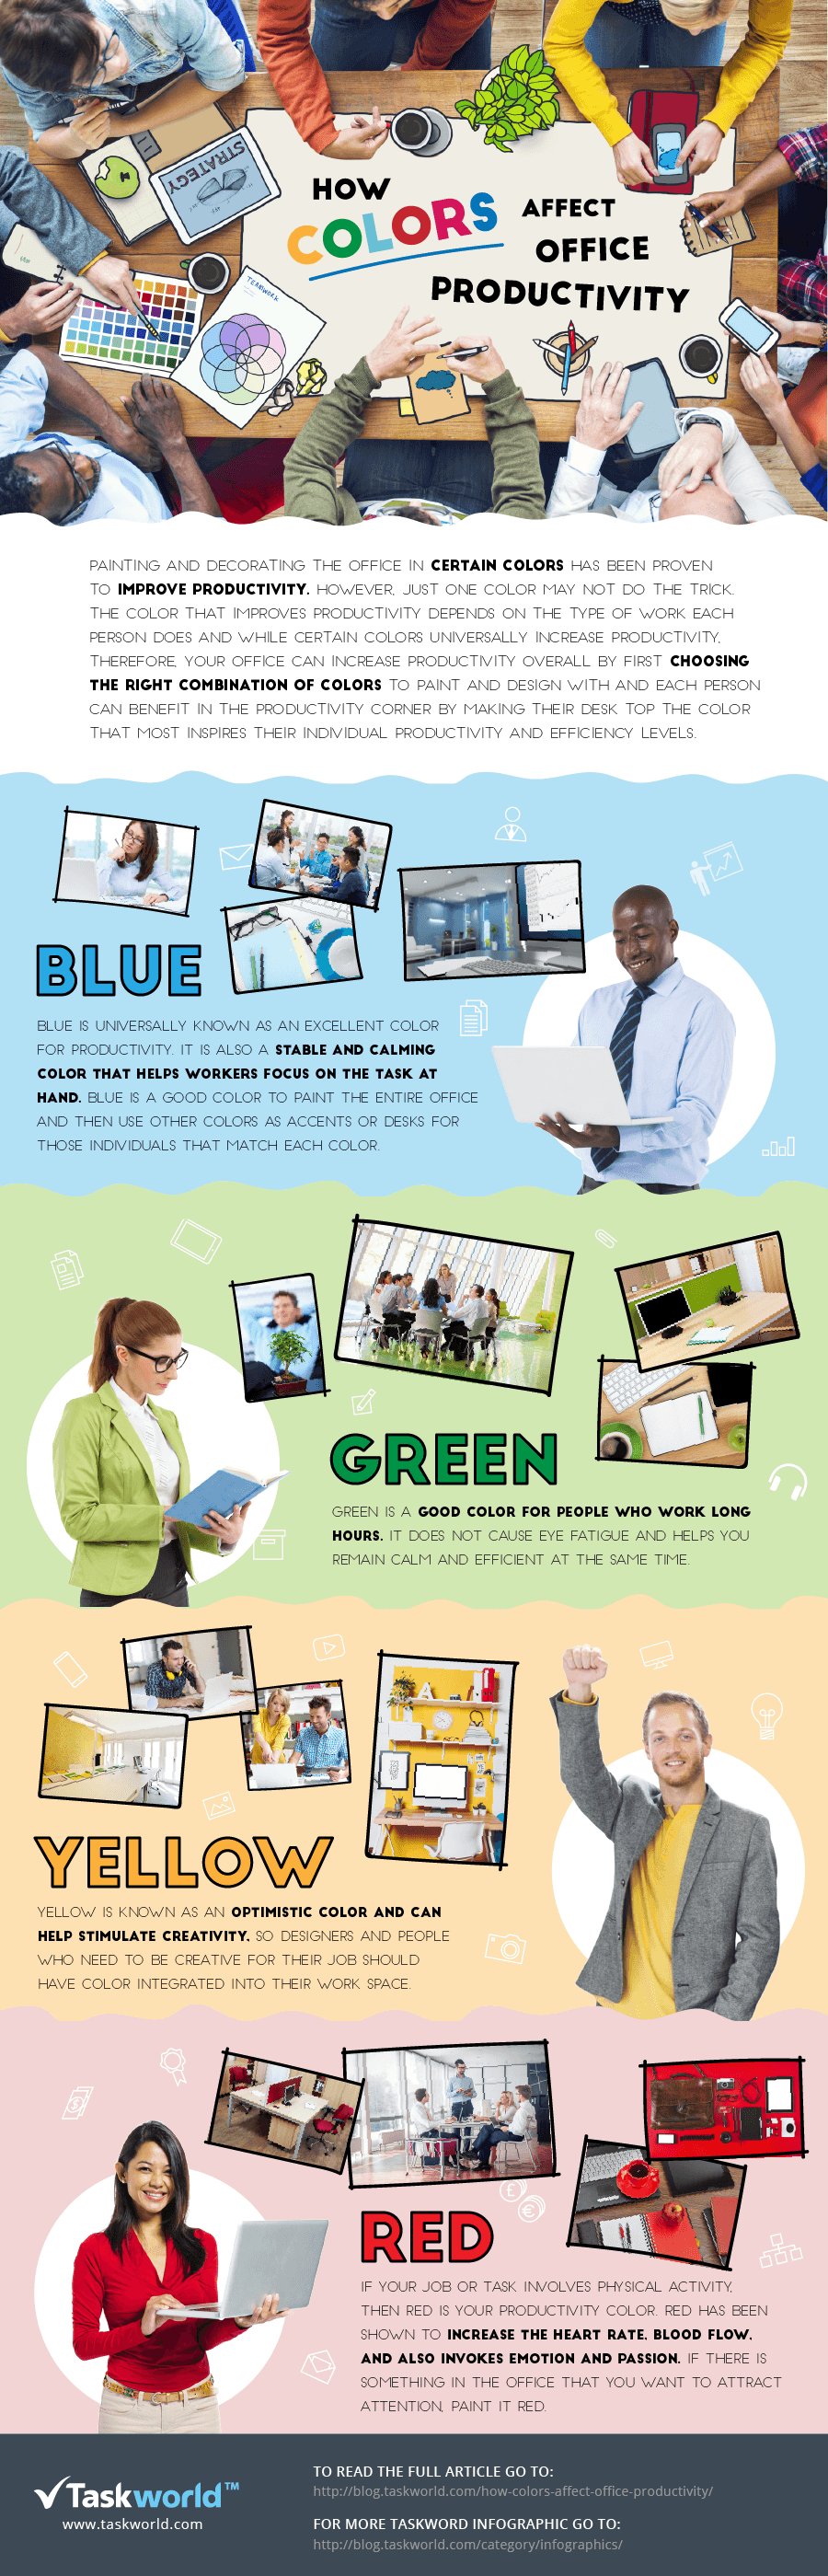 How-Colors-Affect-Office-Productivity-infographic-plaza